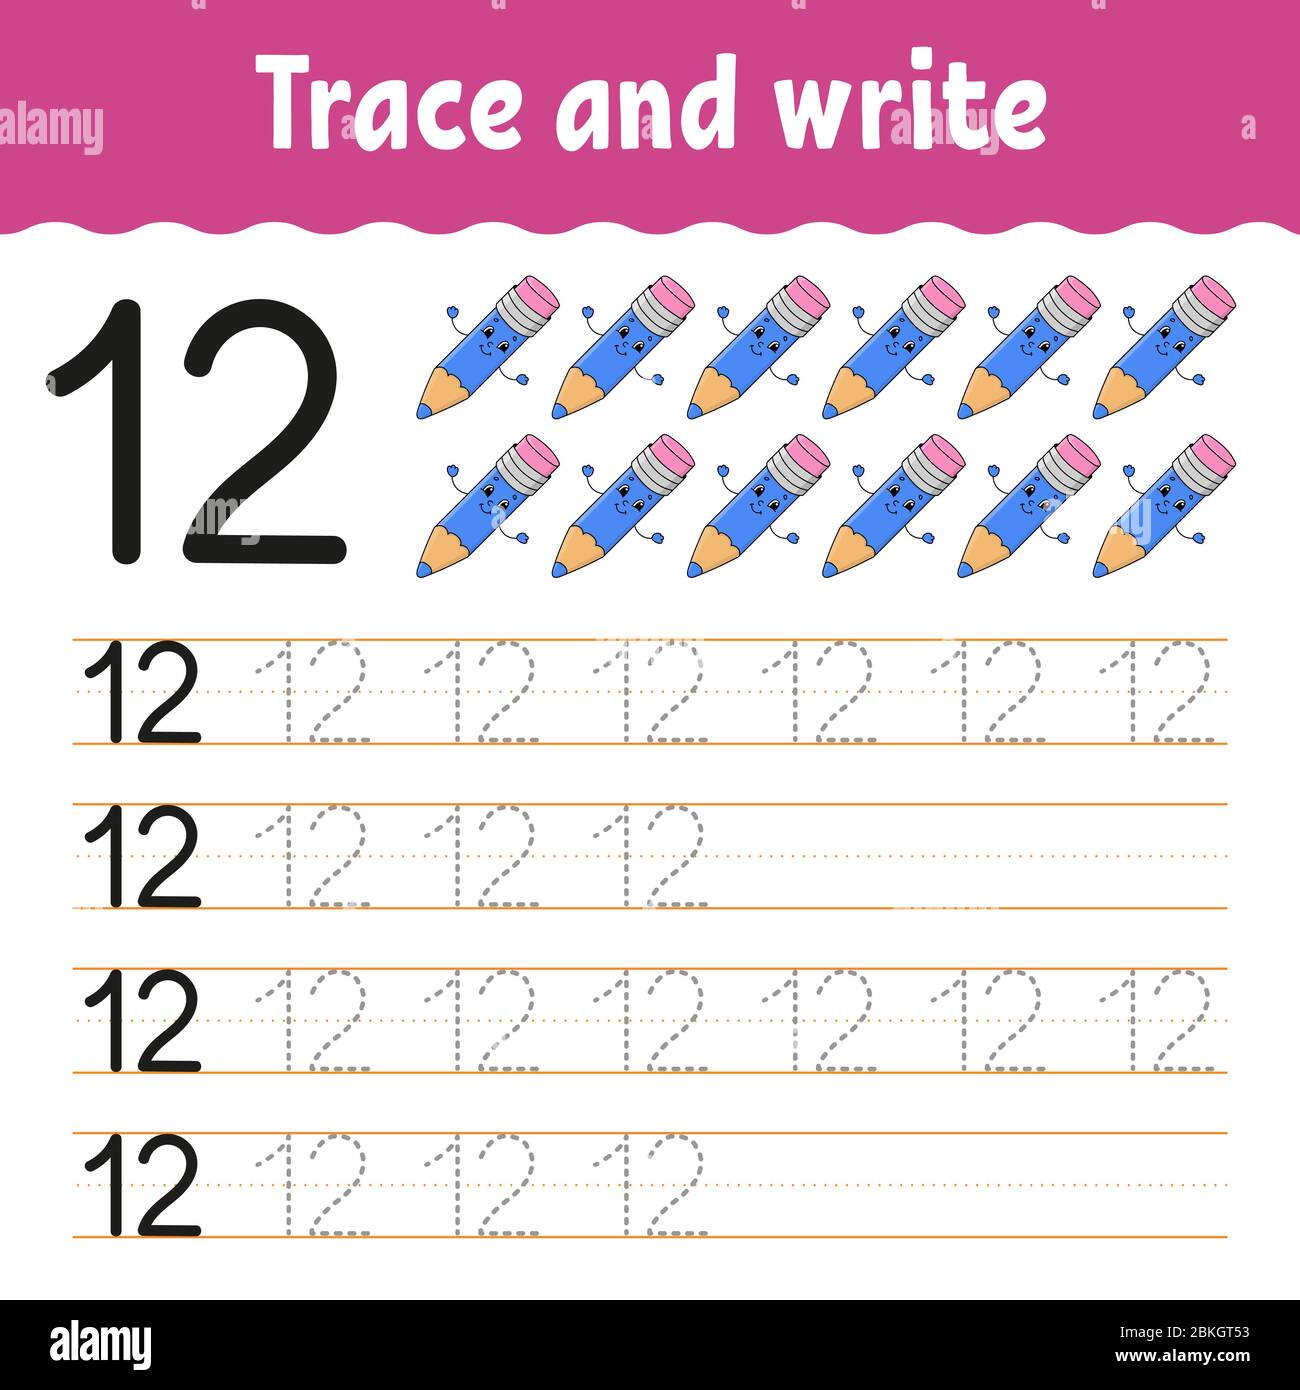 Trace and write. Number 22. Handwriting practice. Learning numbers